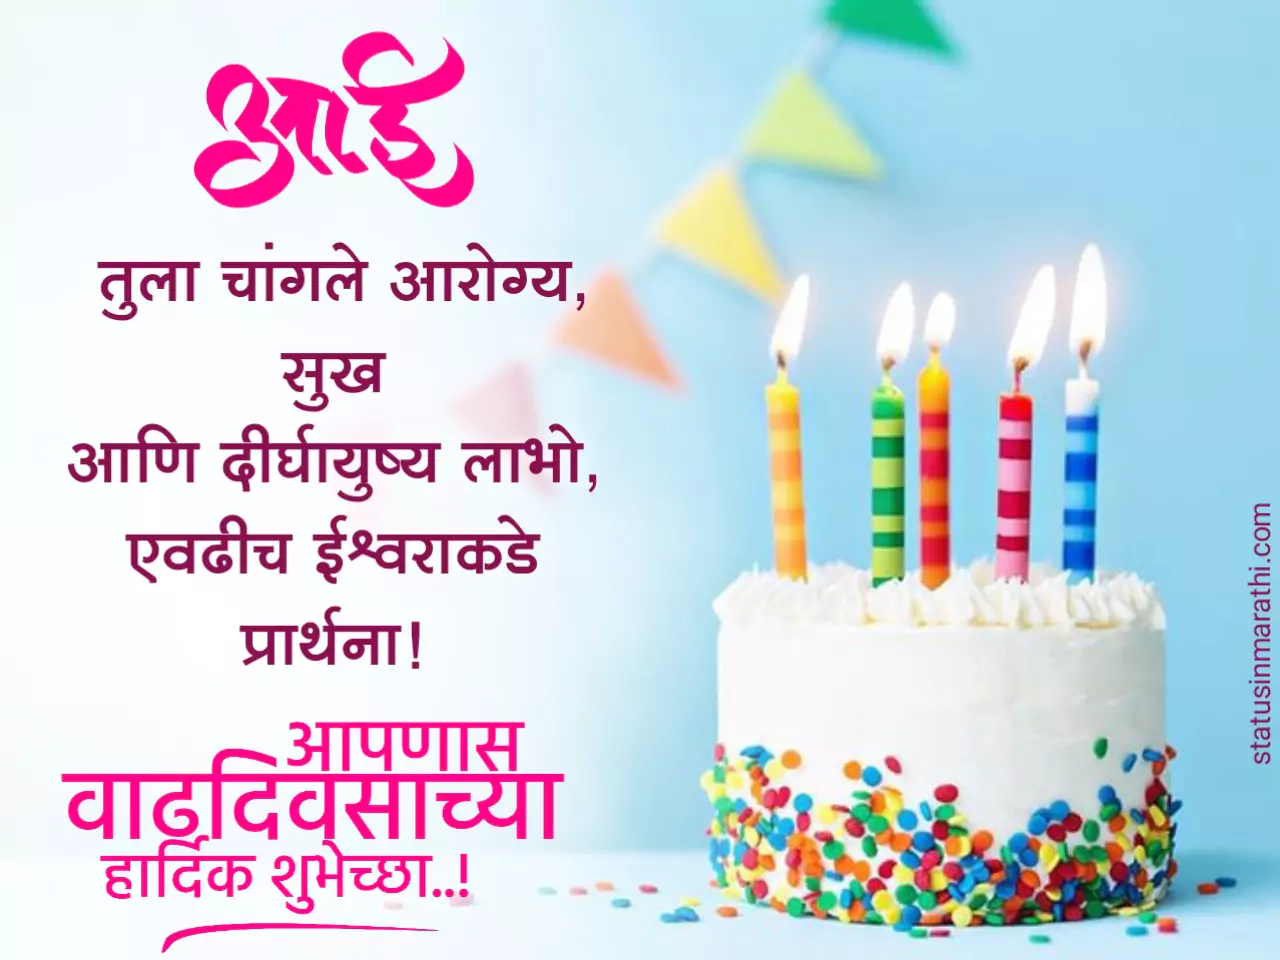 Happy Birthday Image for mother in marathi